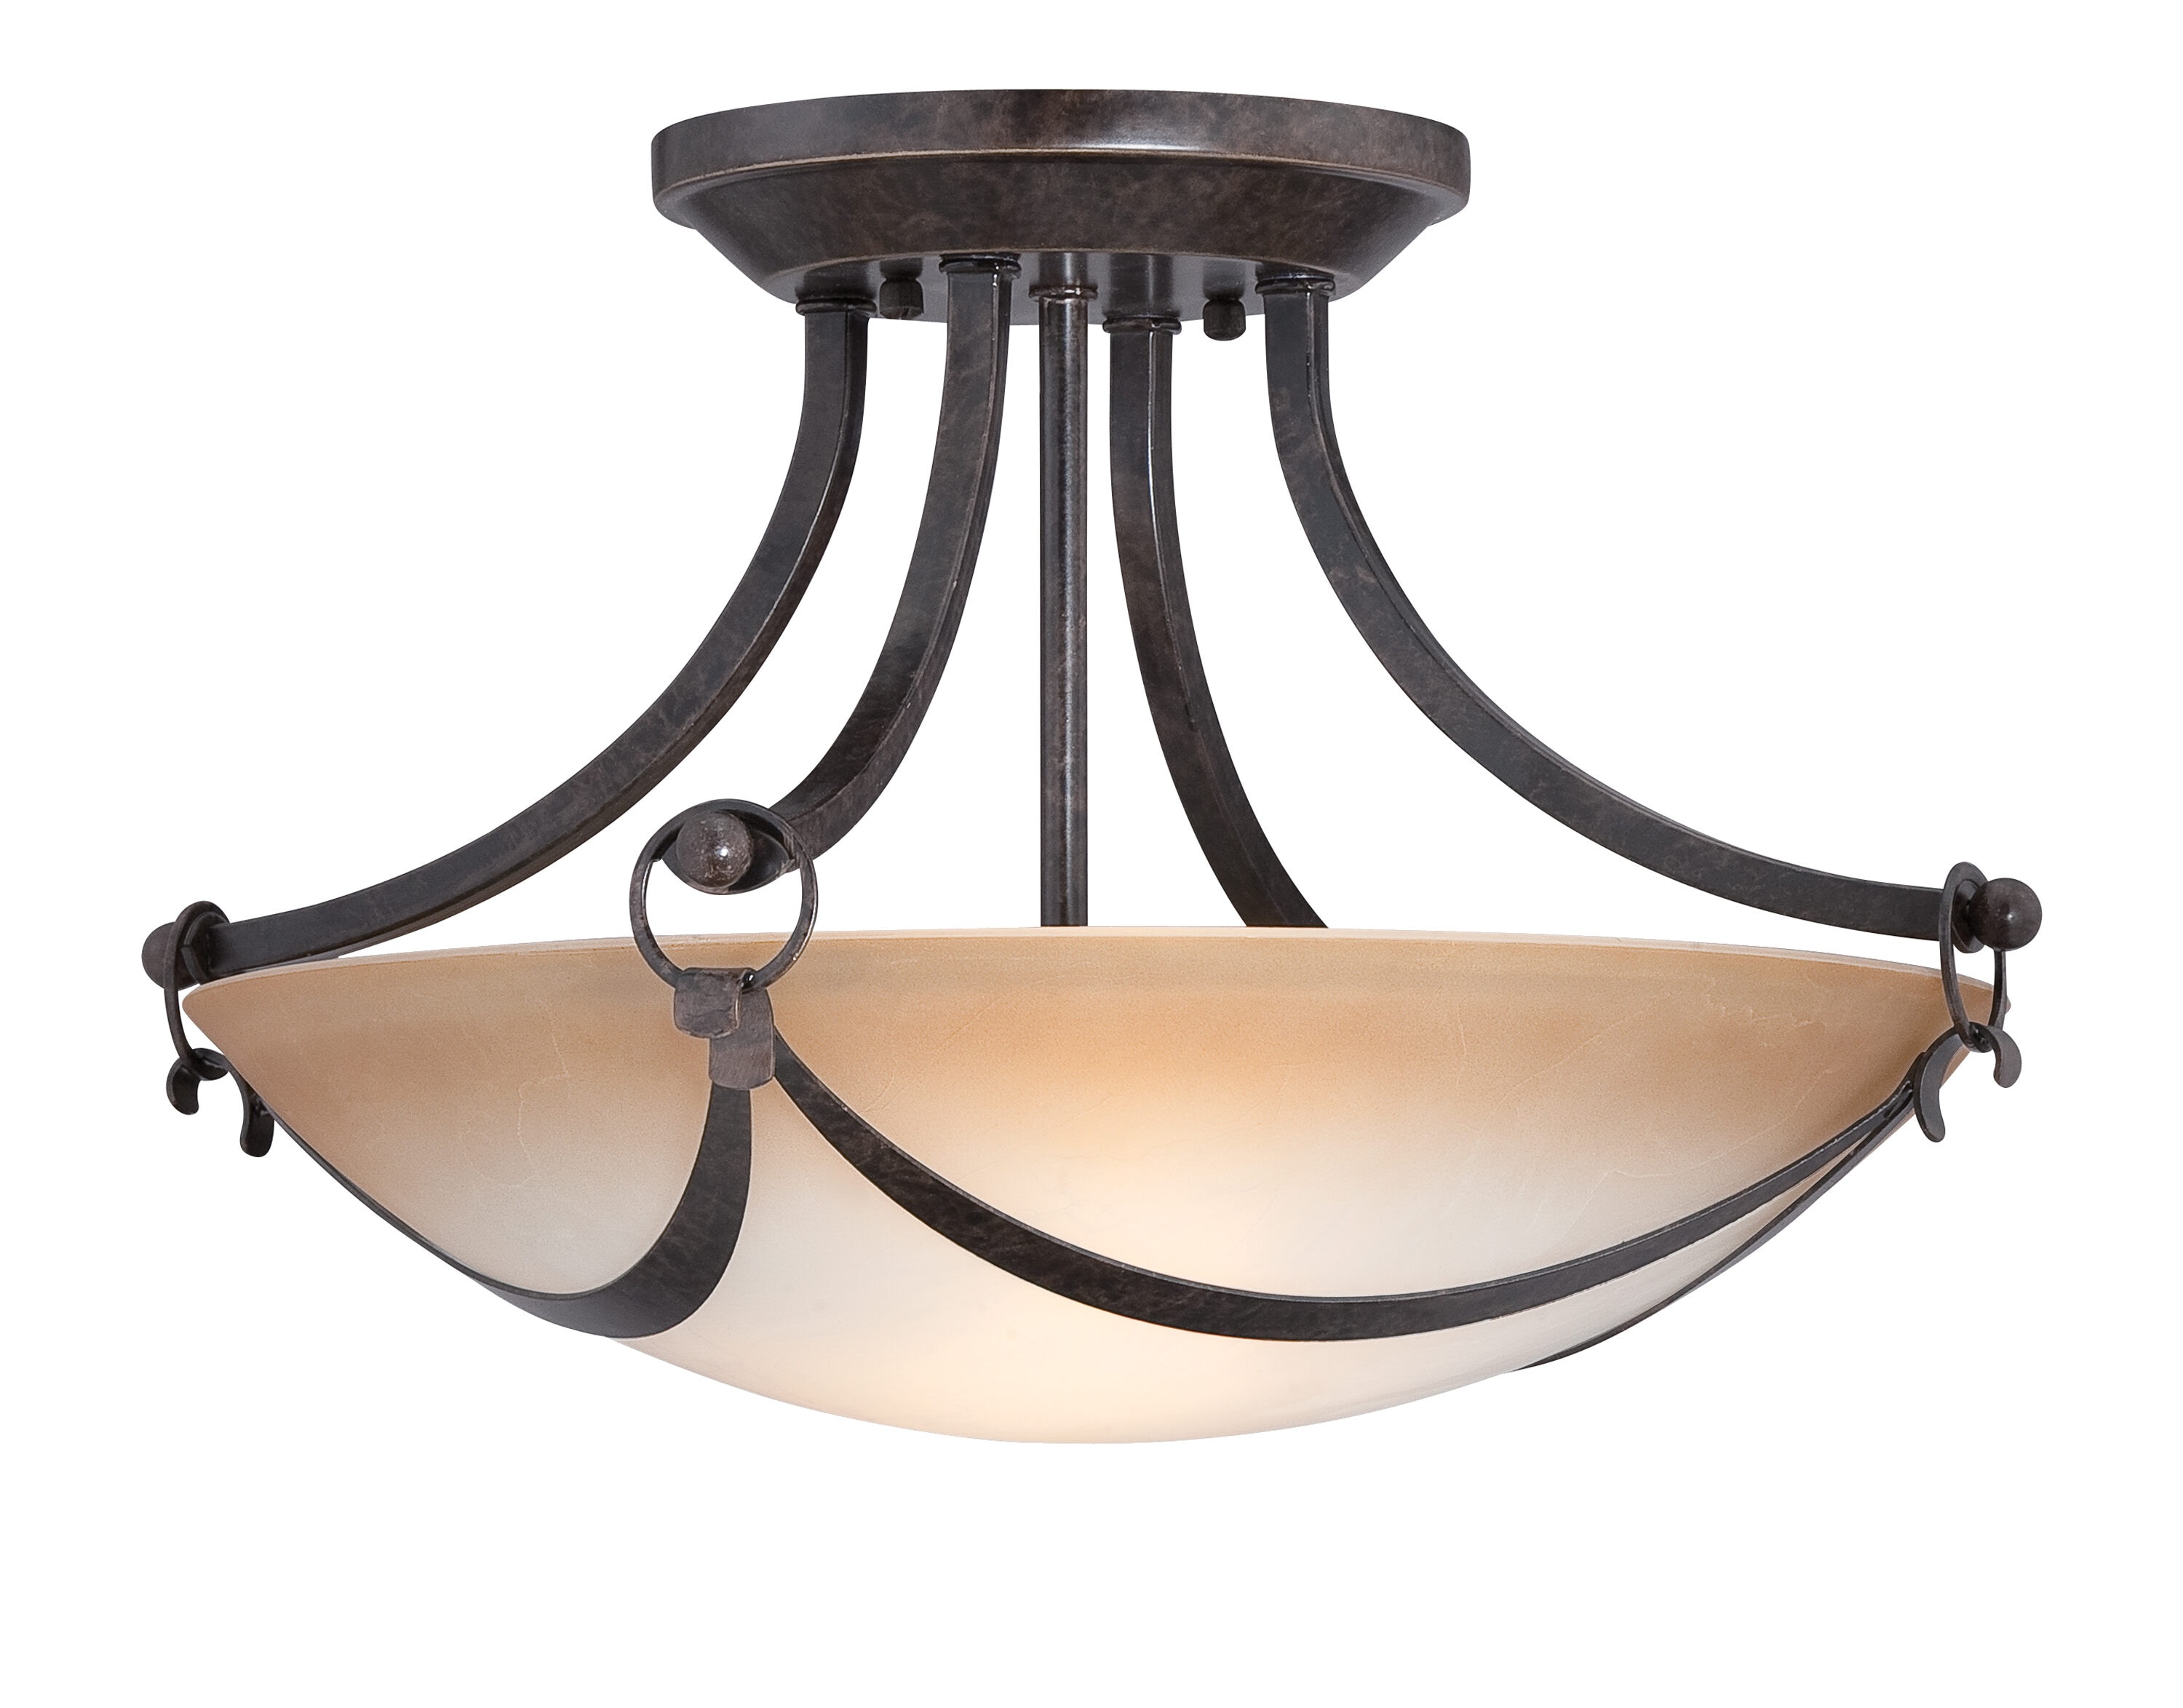 4-Light Oil-Rubbed Bronze Semi-Flushmount Ceiling Light with Crystals Shade